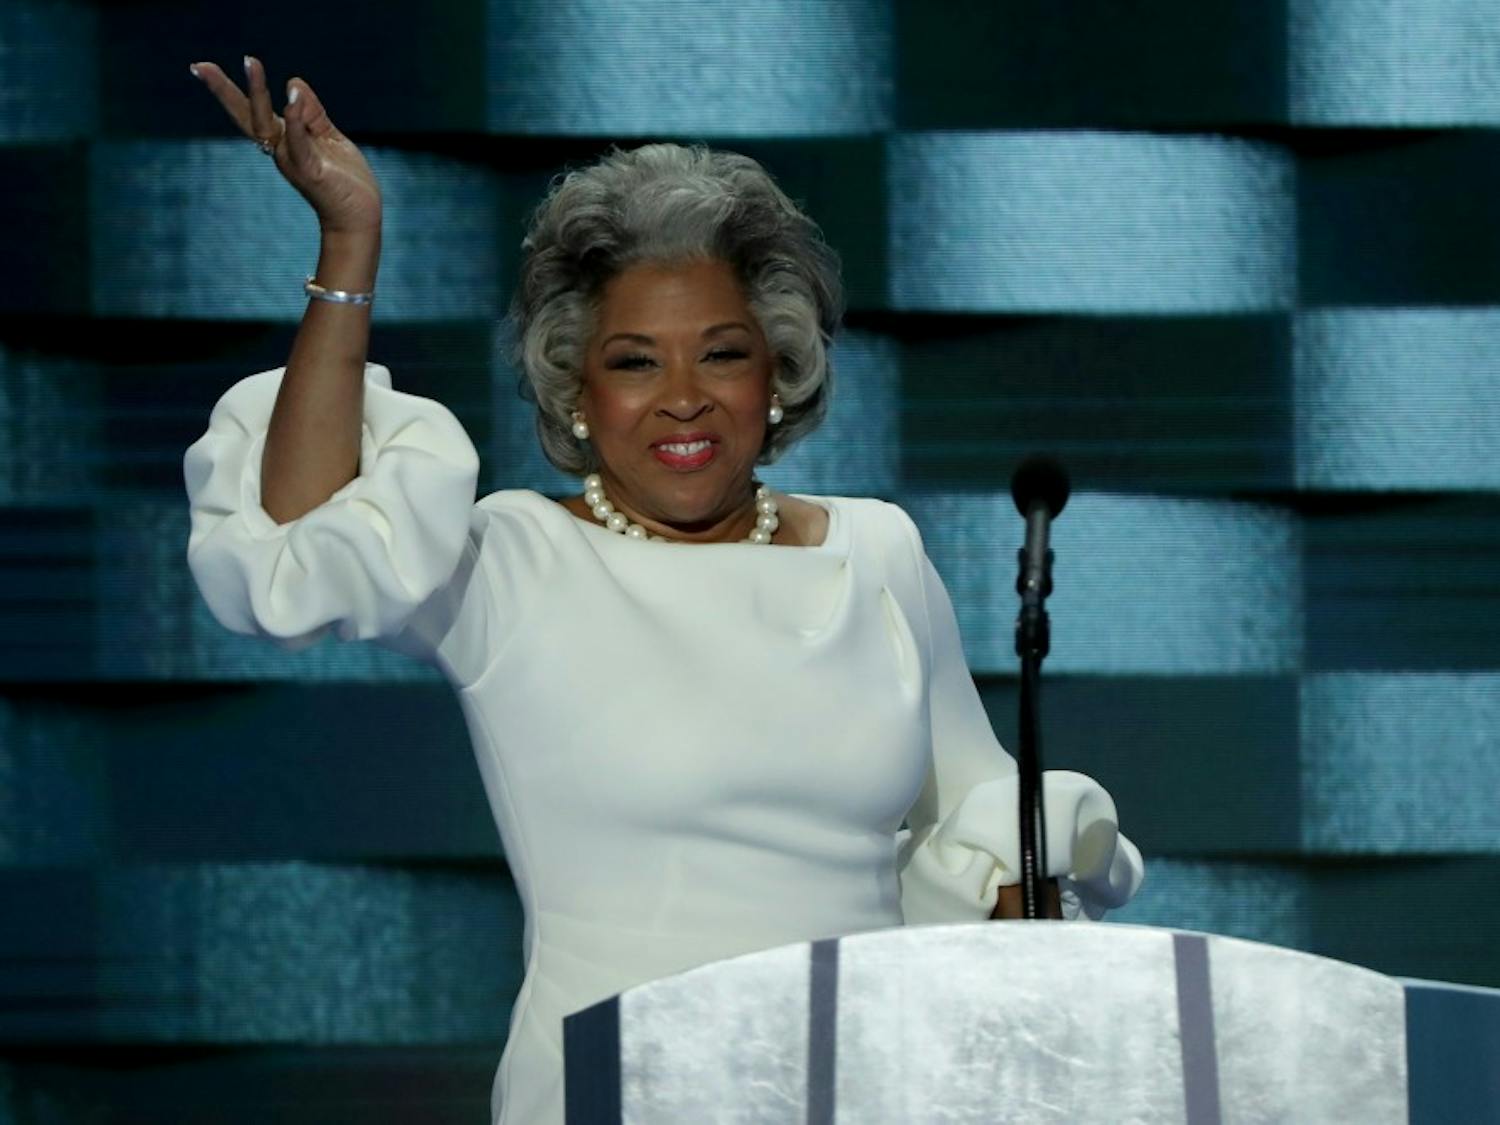 PHILADELPHIA, PA - JULY 28:  U.S. Representative Joyce Beatty (D-OH) waves to the crowd during the fourth day of the Democratic National Convention at the Wells Fargo Center, July 28, 2016 in Philadelphia, Pennsylvania. Democratic presidential candidate Hillary Clinton received the number of votes needed to secure the party's nomination. An estimated 50,000 people are expected in Philadelphia, including hundreds of protesters and members of the media. The four-day Democratic National Convention kicked off July 25.  (Photo by Alex Wong/Getty Images)